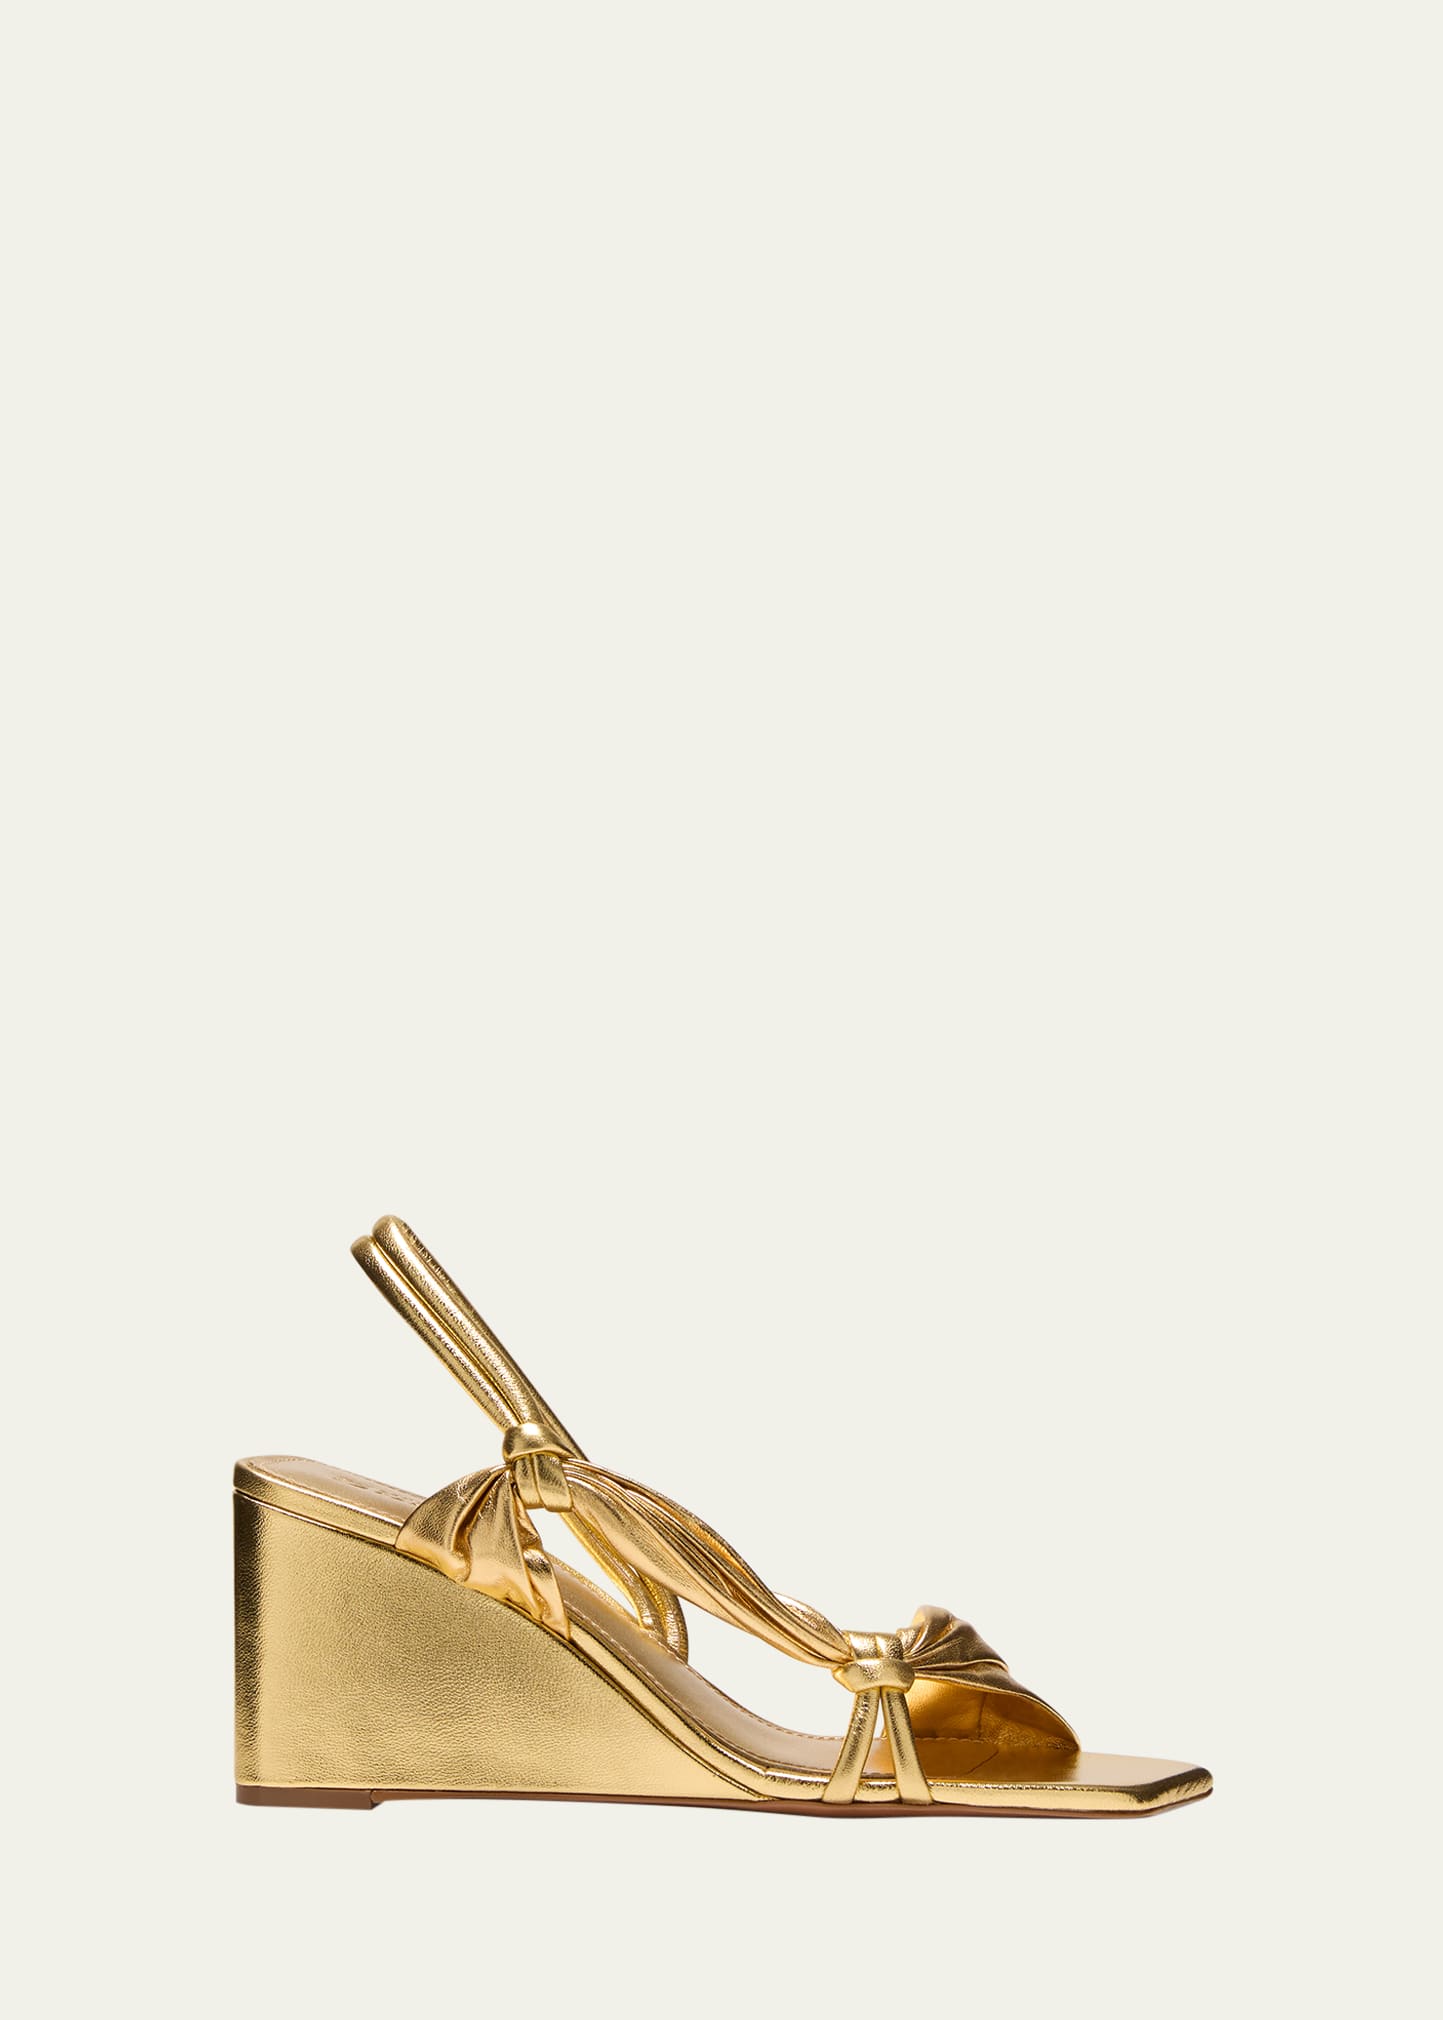 Laura Knotted Metallic Wedge Sandals